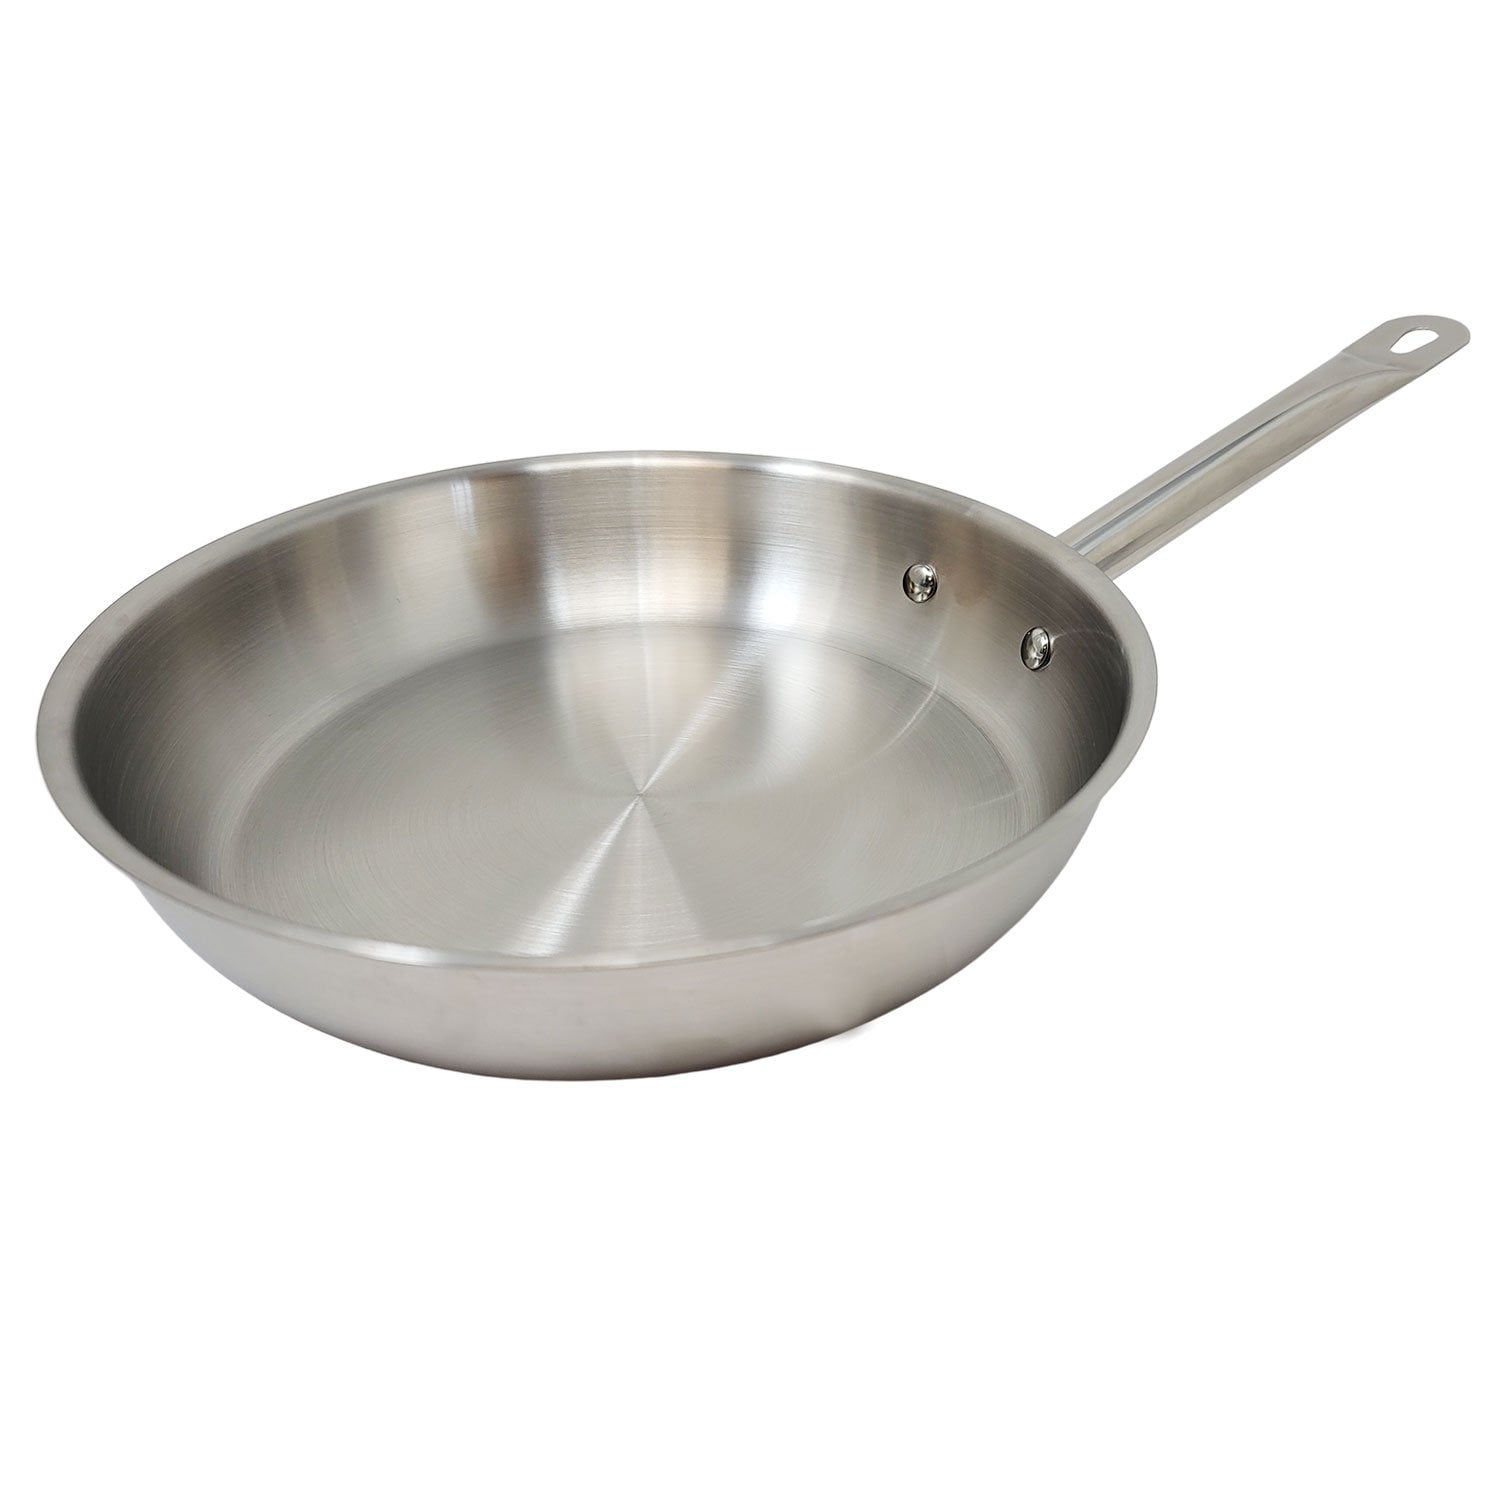 PROFESSIONAL QUALITY STAINLESS STEEL FRYING PAN 